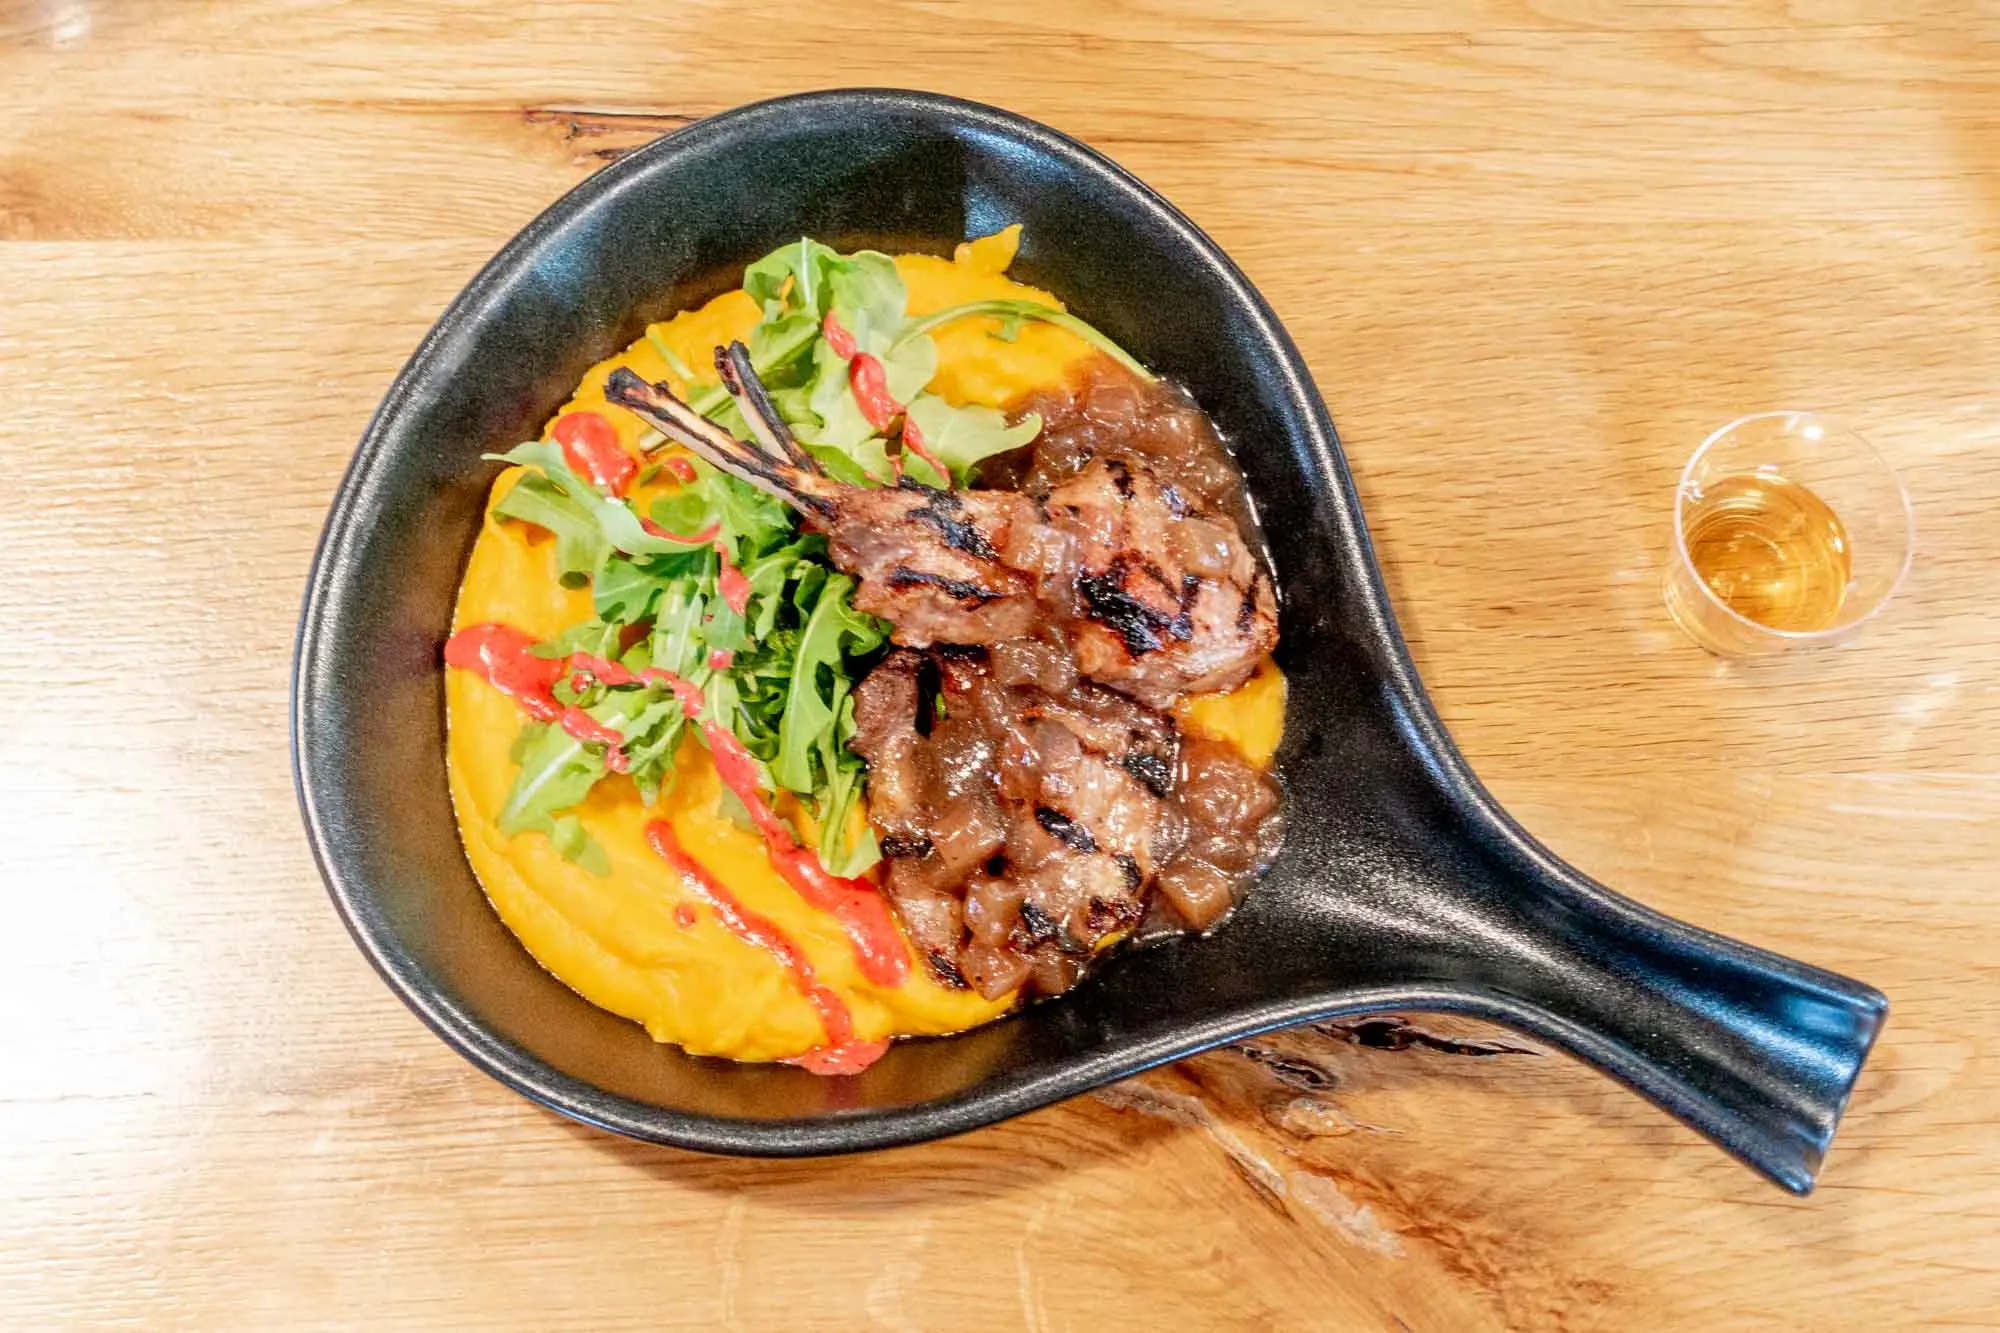 Lamb chops on top of sweet potatoes in a skillet